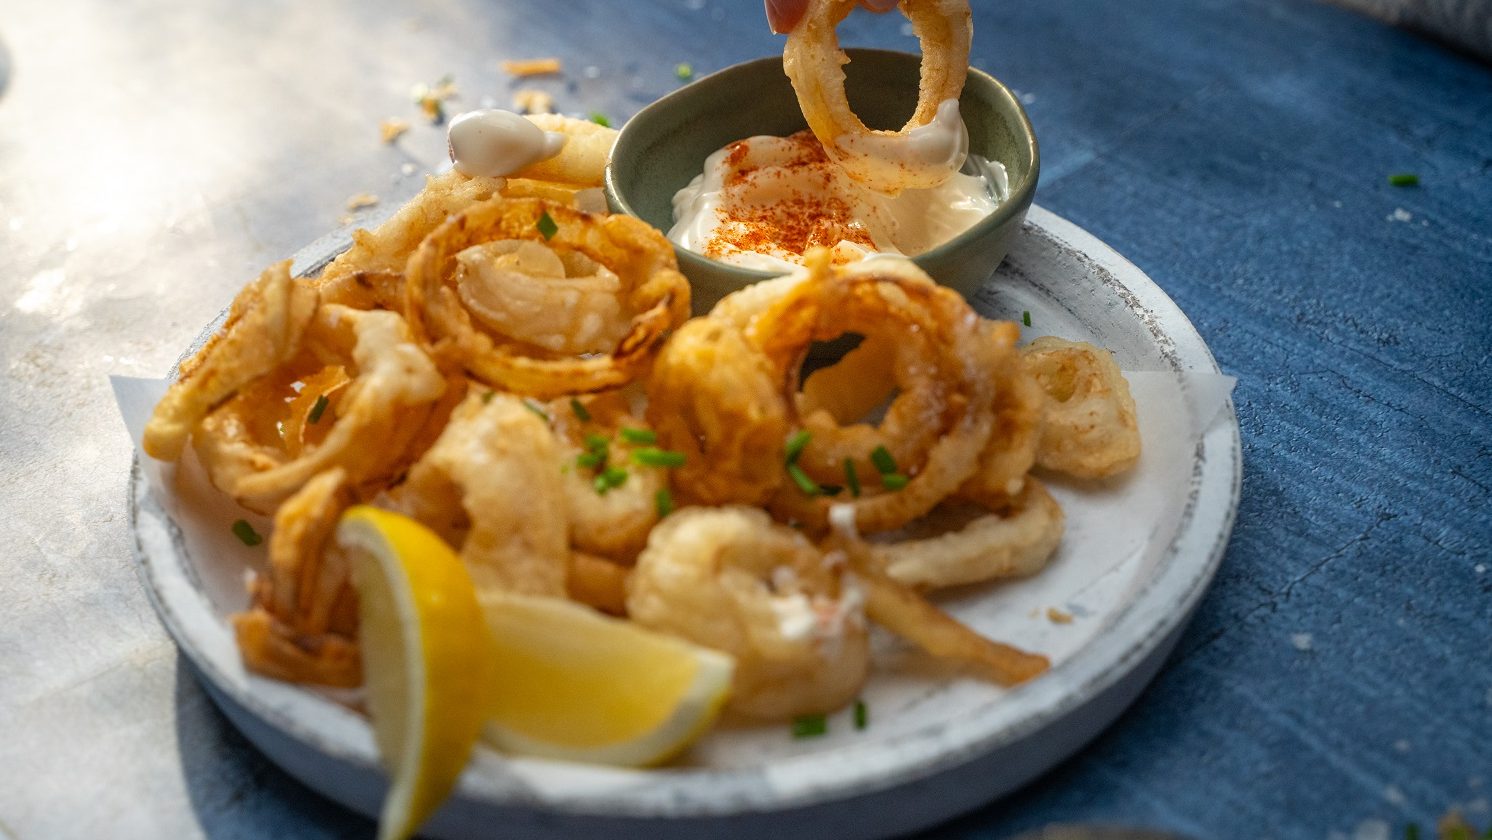 Plate of fried onion and squid rings with lemon wedges and a pot of dipping sauce.